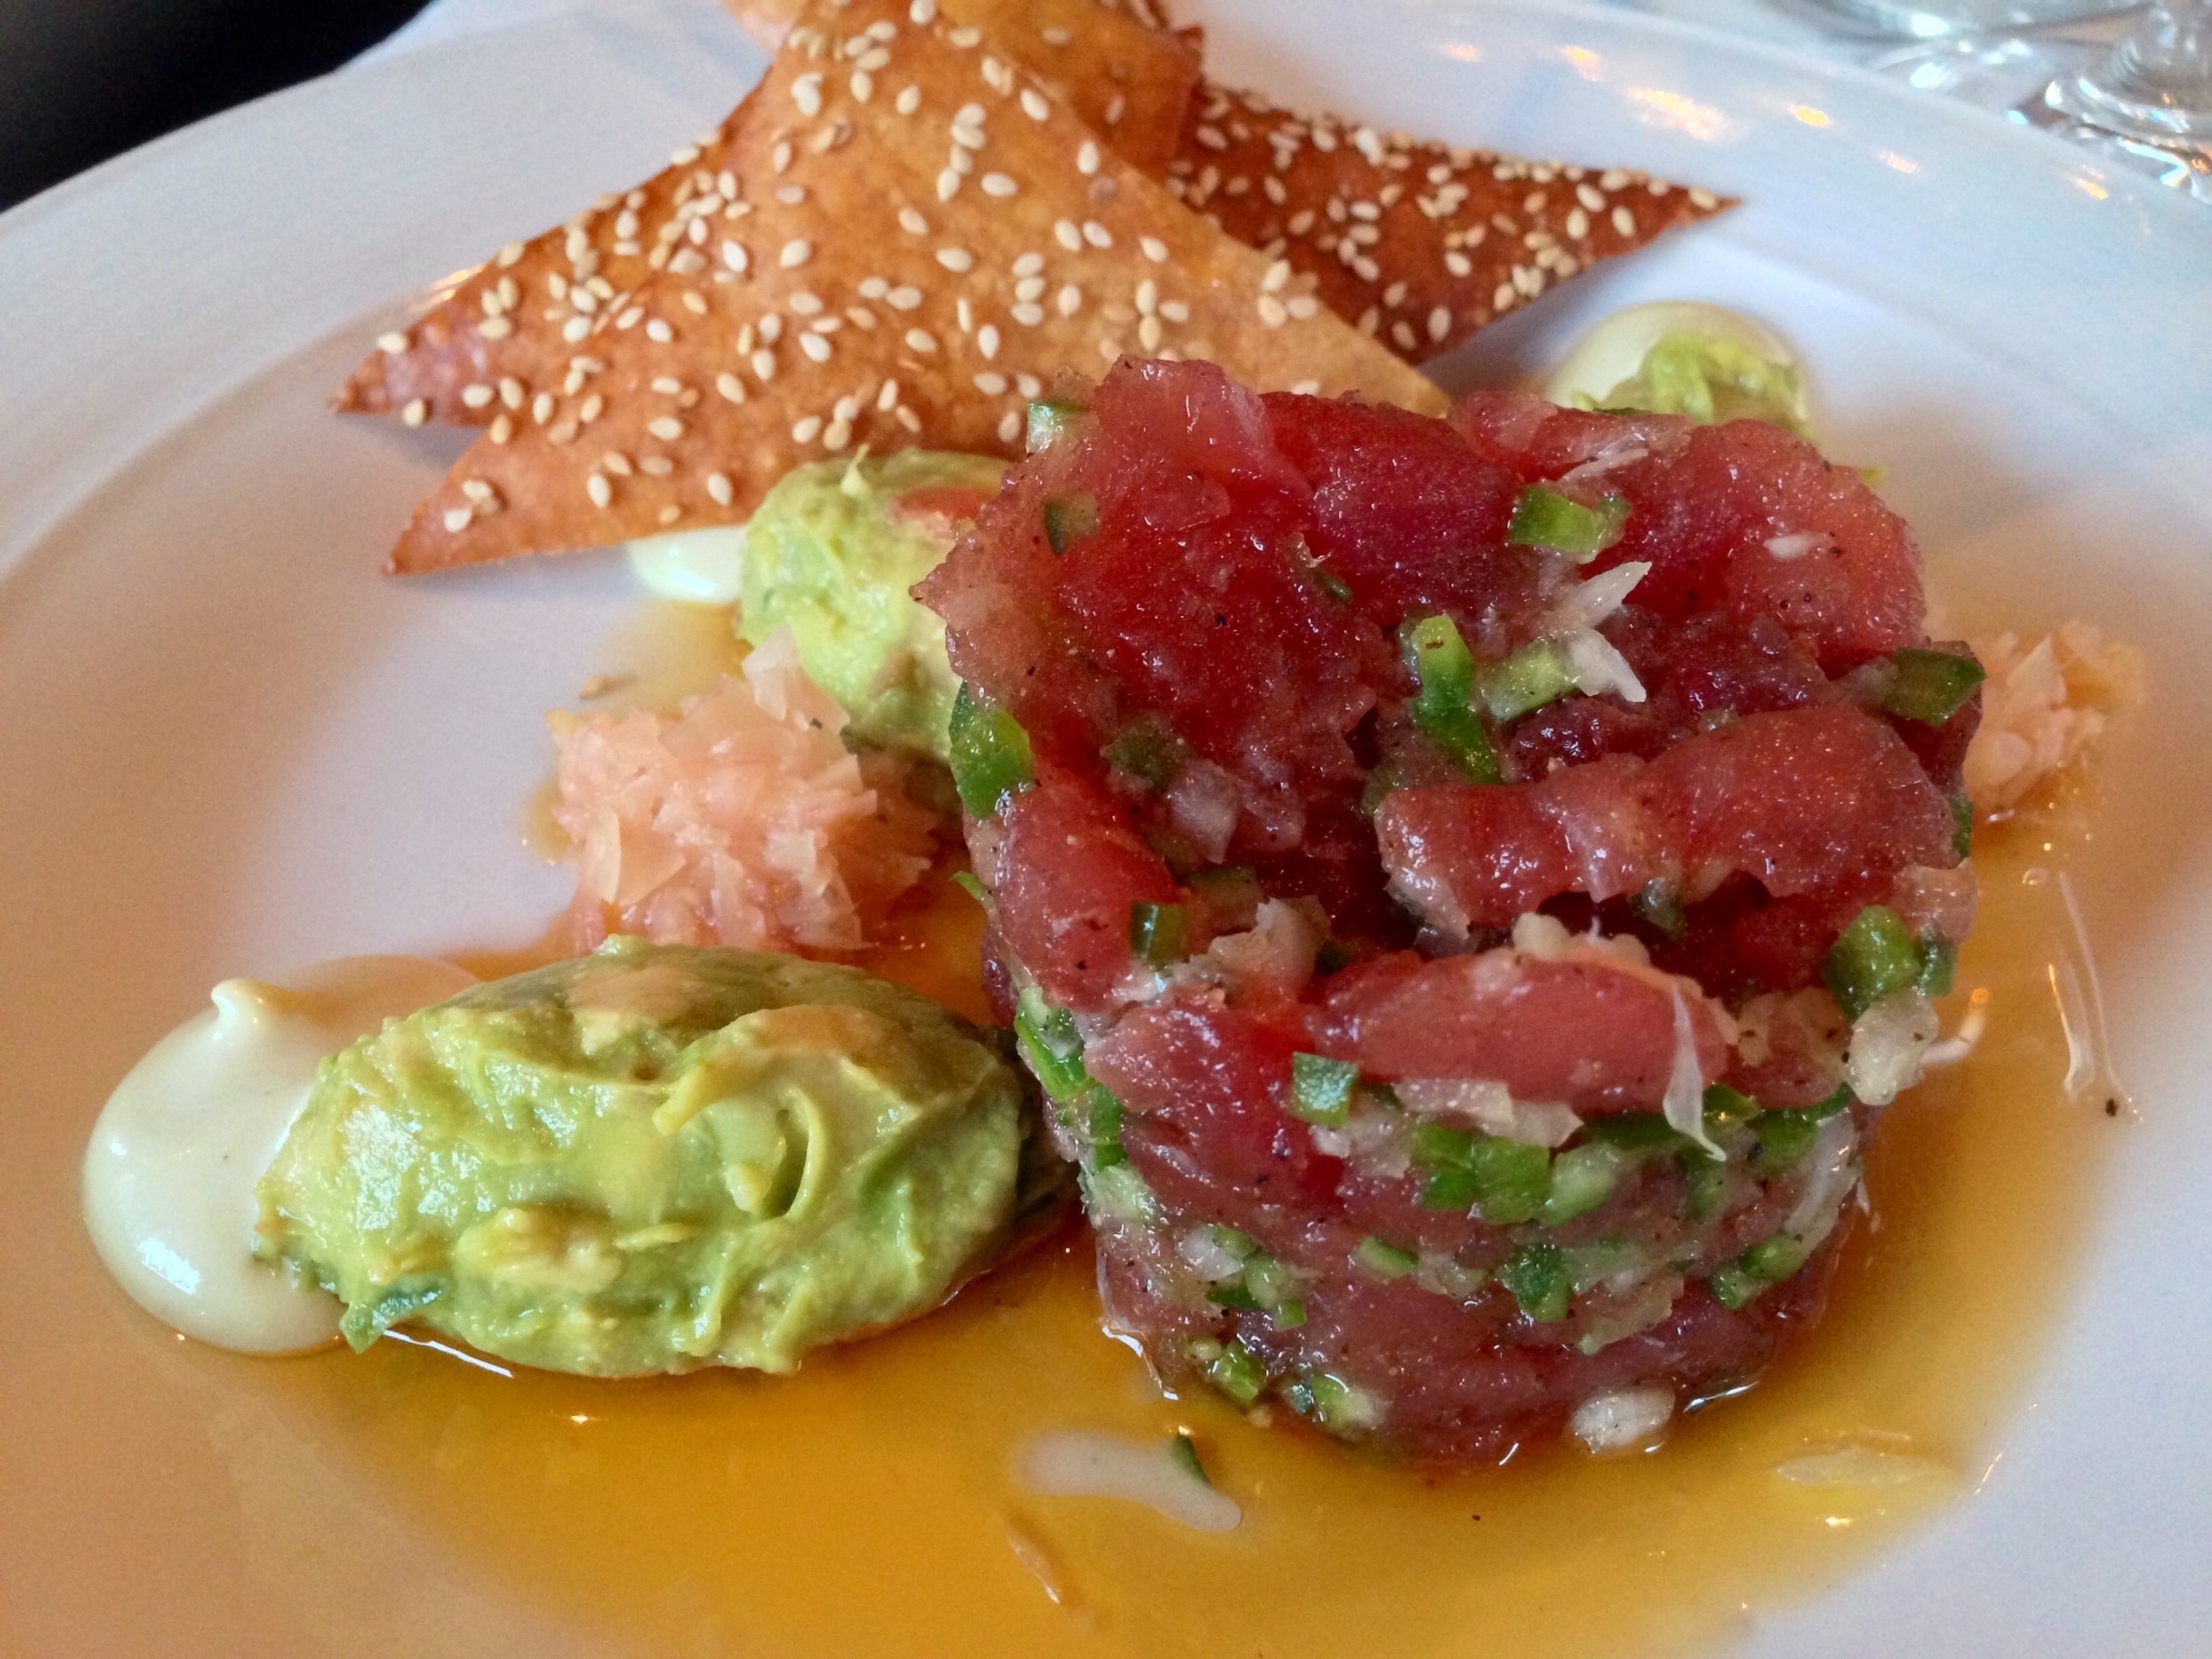 Asian tuna tartar. Fresh and light with just the right amount of heat from the wasabi.